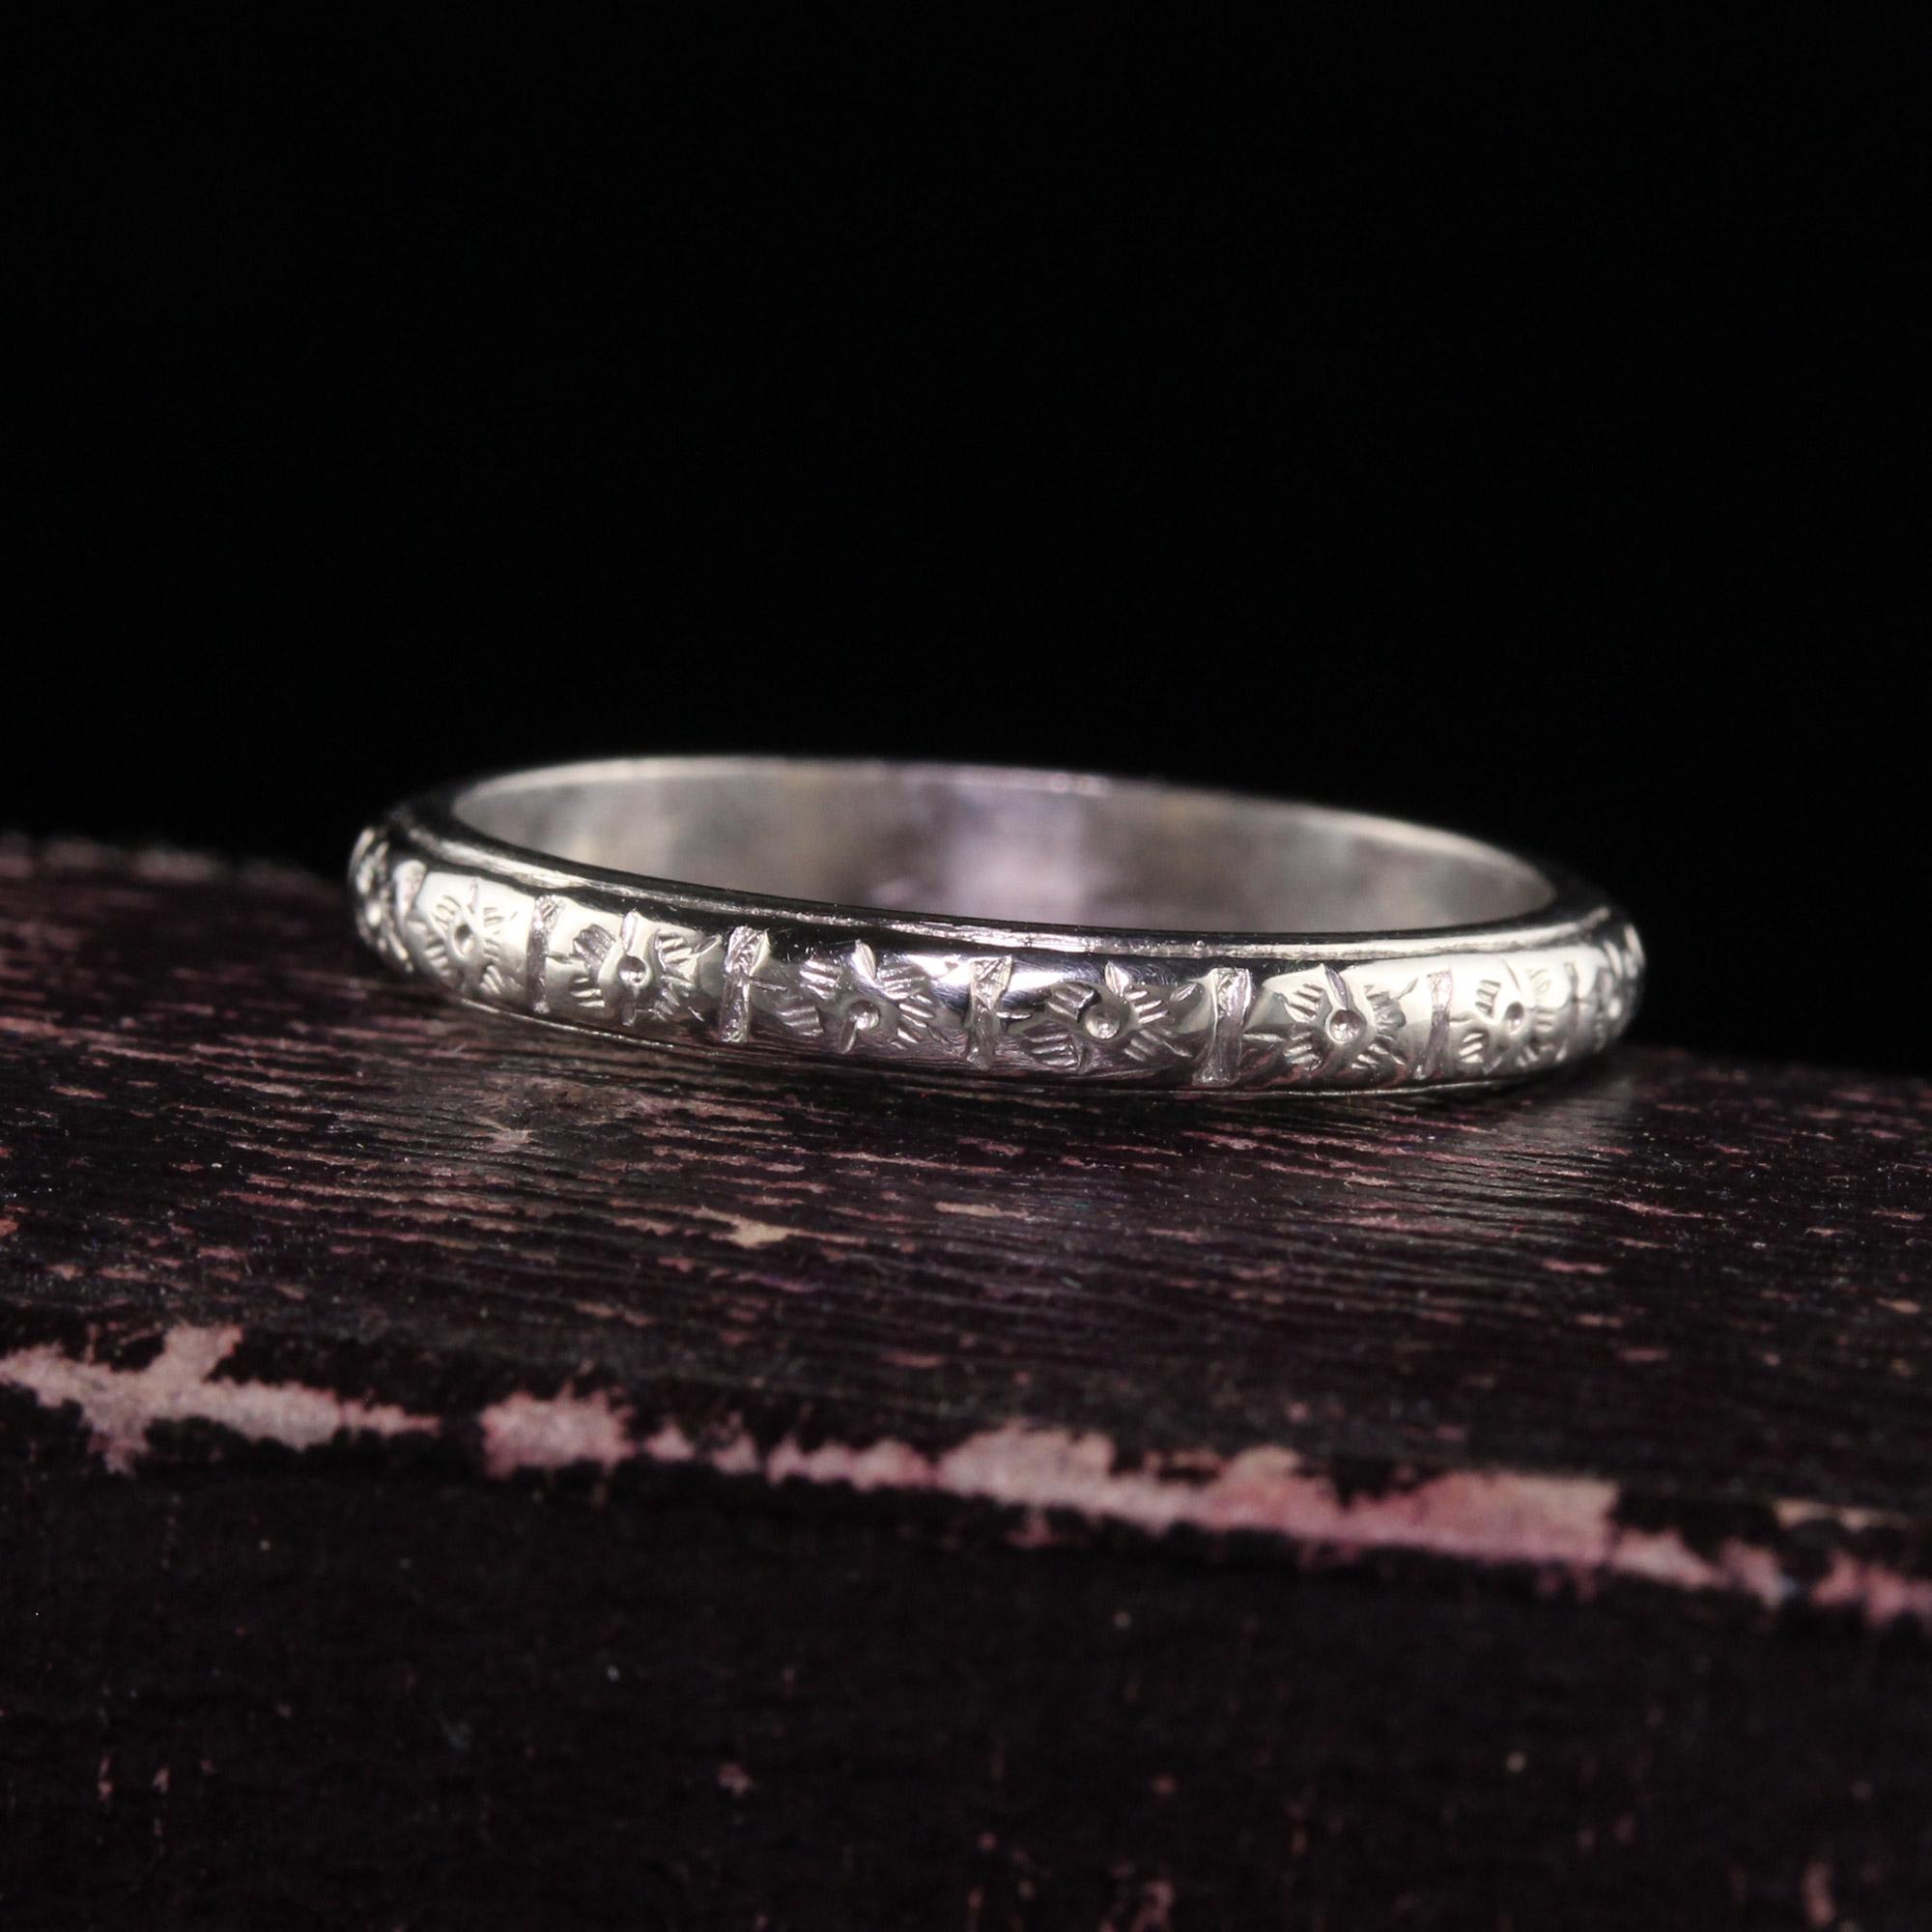 Beautiful Antique Art Deco Platinum Blossom Engraved Wedding Band - Size 6 1/4. This beautiful wedding band is crafted in platinum. There is a flower blossom engraving going around the entire ring and is in great condition.

Item #R1474

Metal: